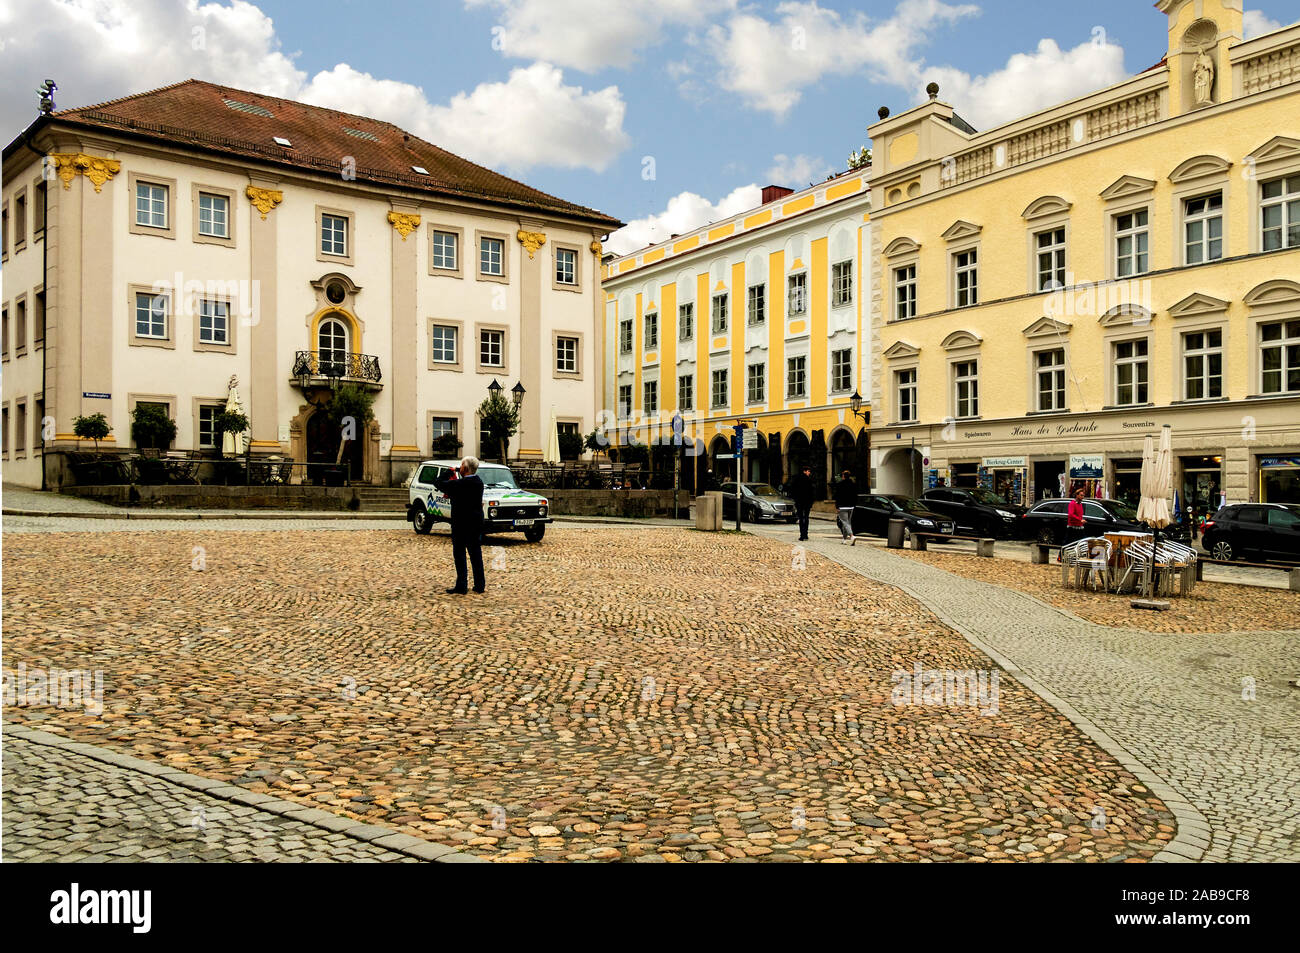 The main city square in Passau, Germany, with the Town Hall to the right Stock Photo